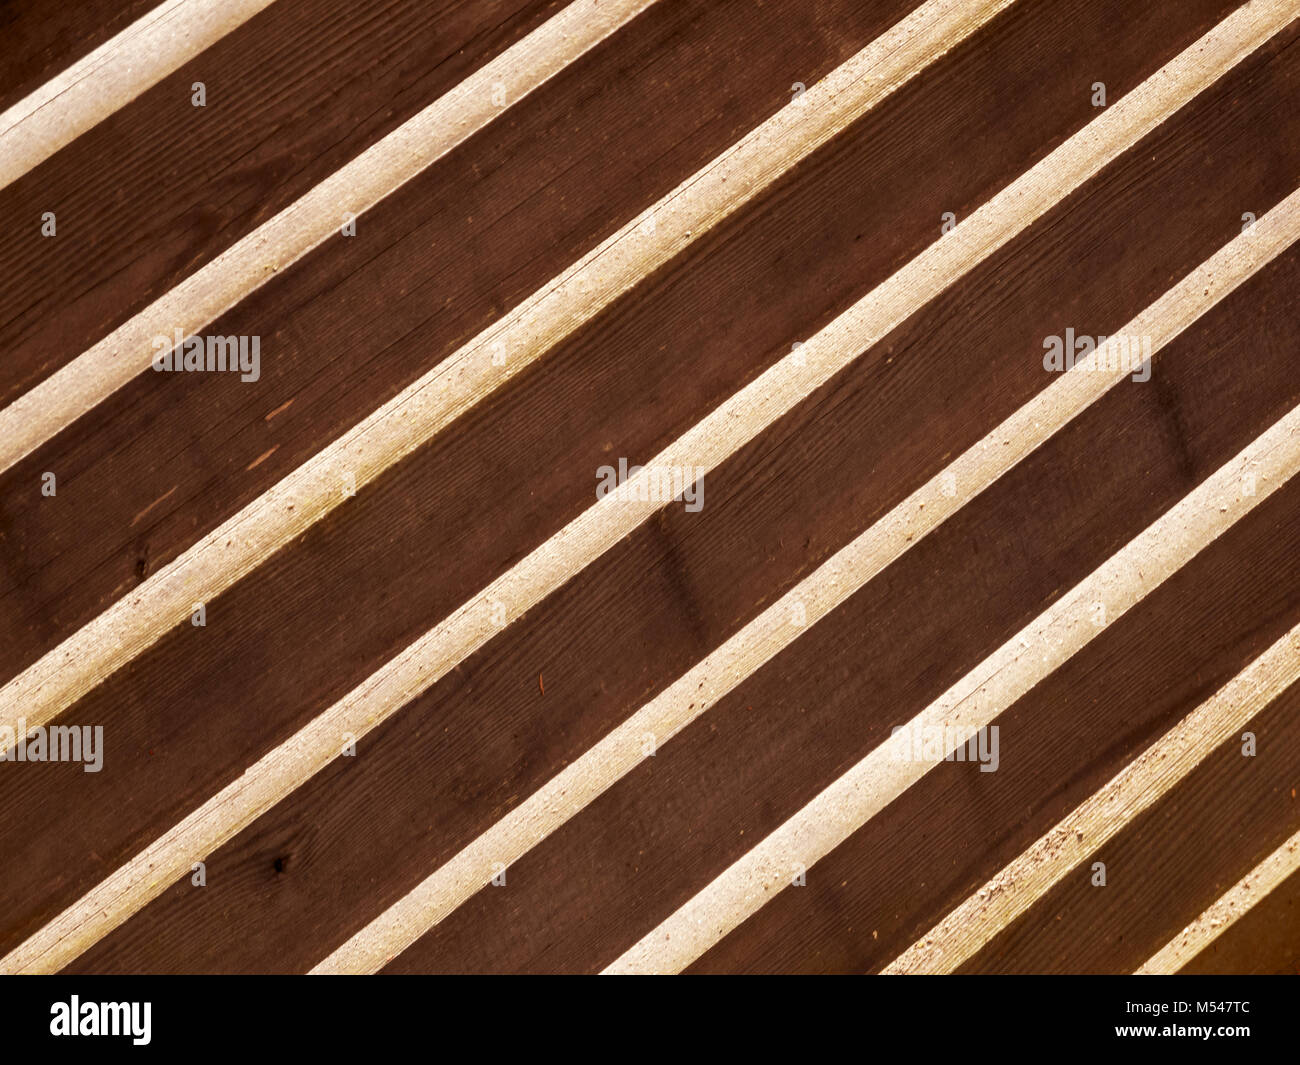 Diagonal boards with light incidence Stock Photo